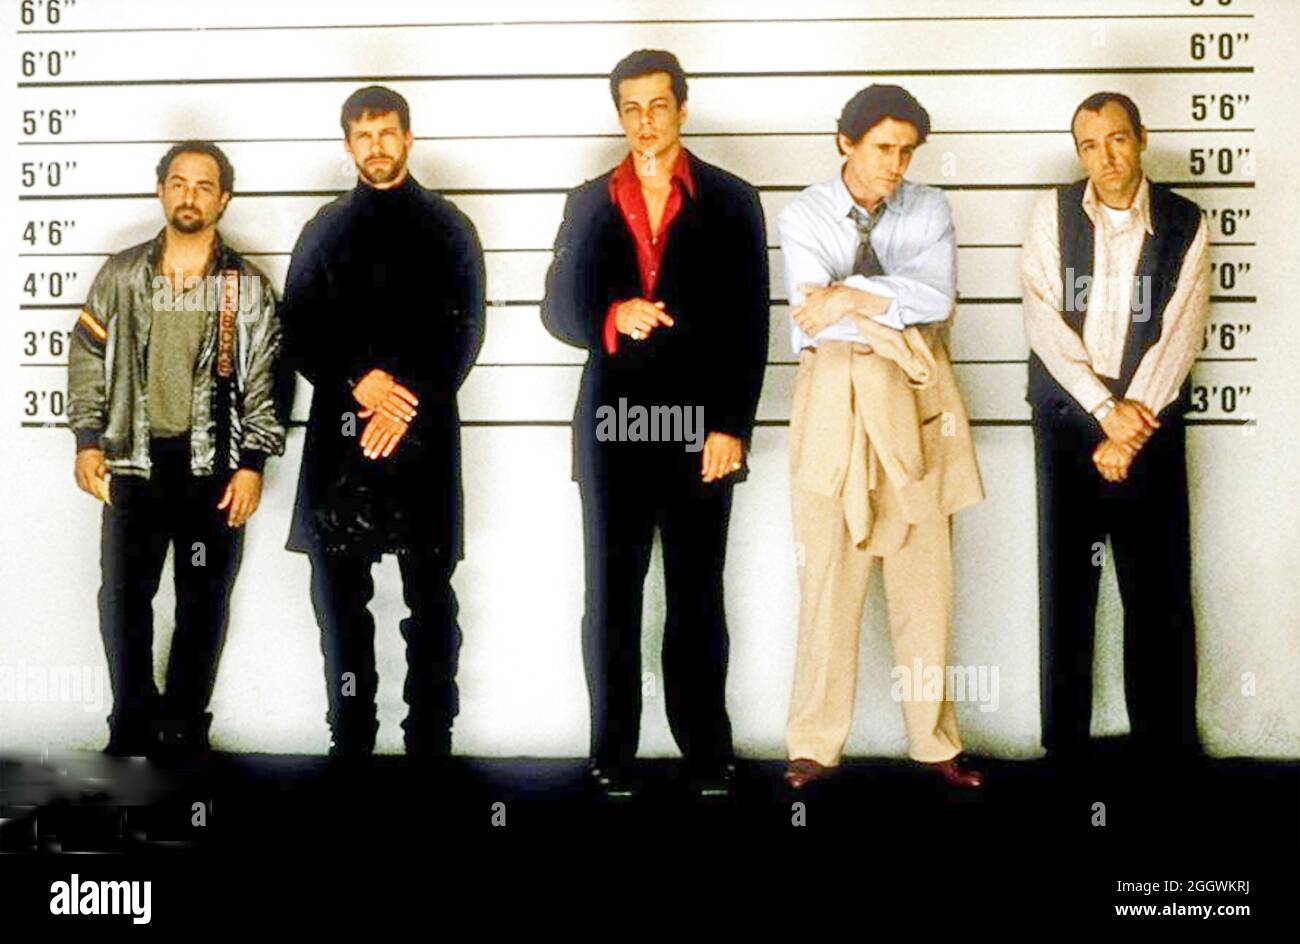 THE USUAL SUSPECTS 1995 Gramercy Pictures film with from left: Kevin Pollak, Stephen Baldwin,Benicio del Toro, Gabriel Byrne, Kervin Spacey Stock Photo